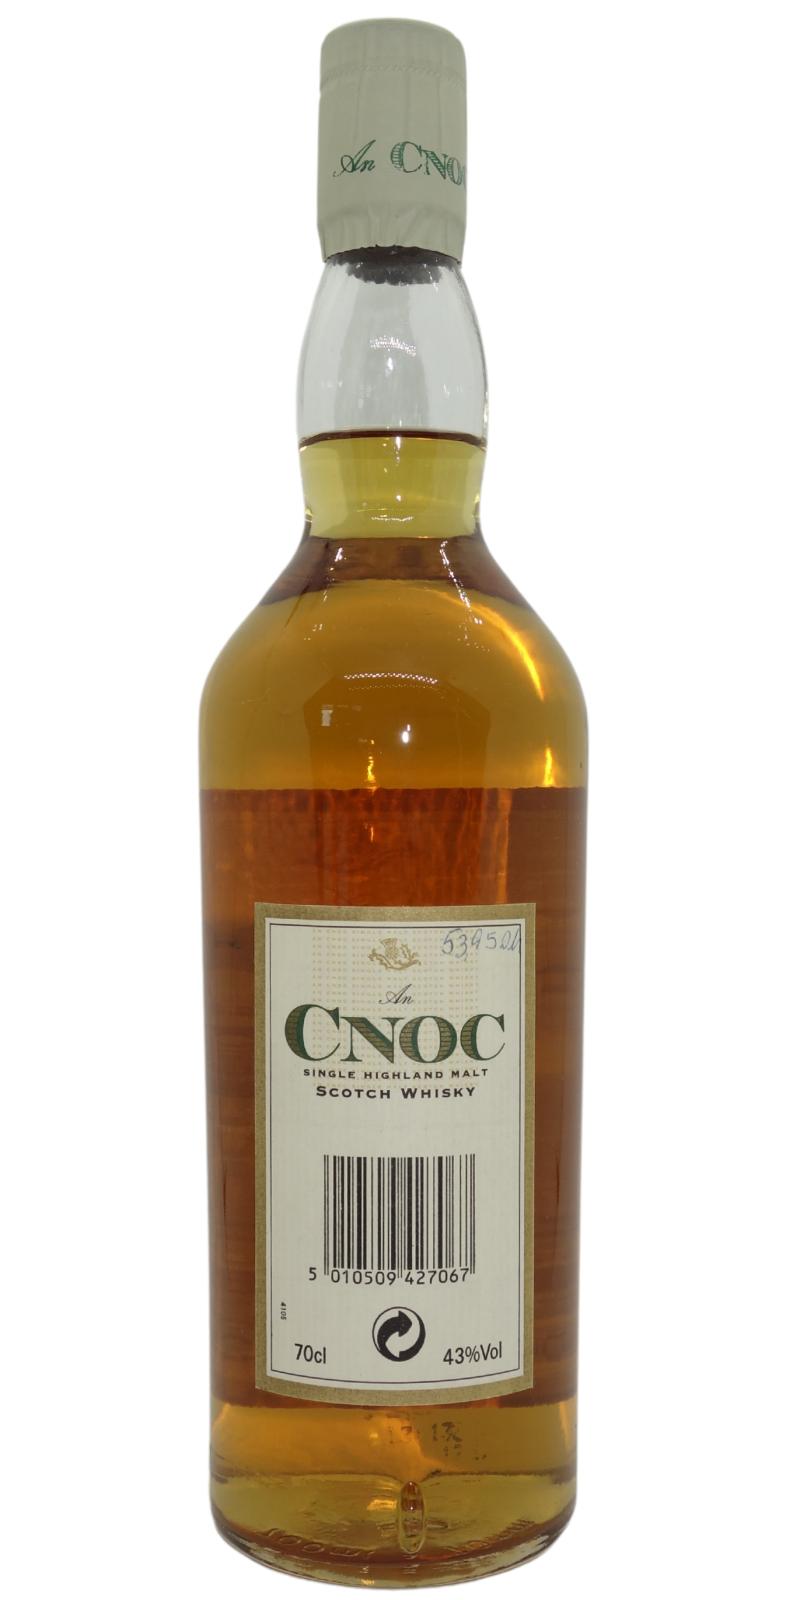 anCnoc 12-year-old